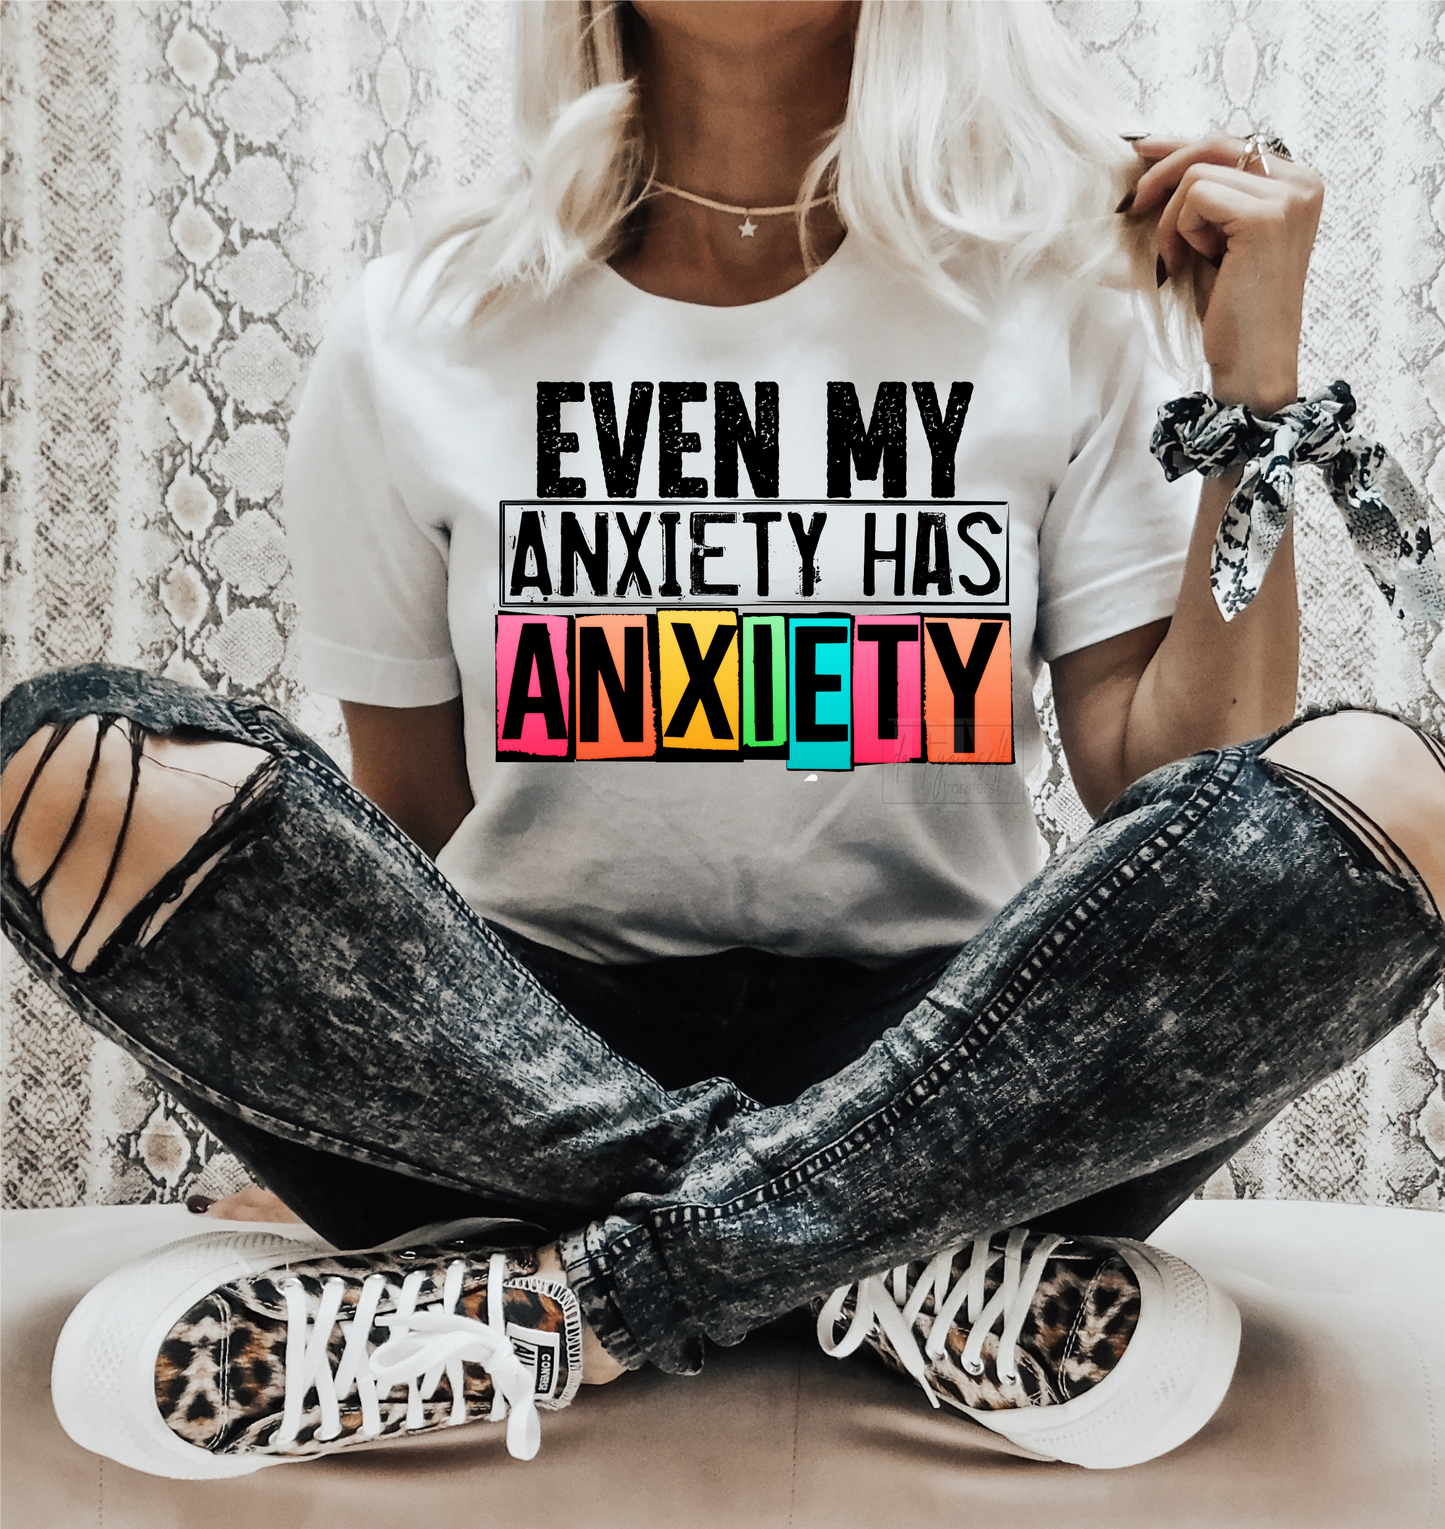 Even my Anxiety has ANXIETY  adult size 9.5x12 DTF TRANSFERPRINT TO ORDER